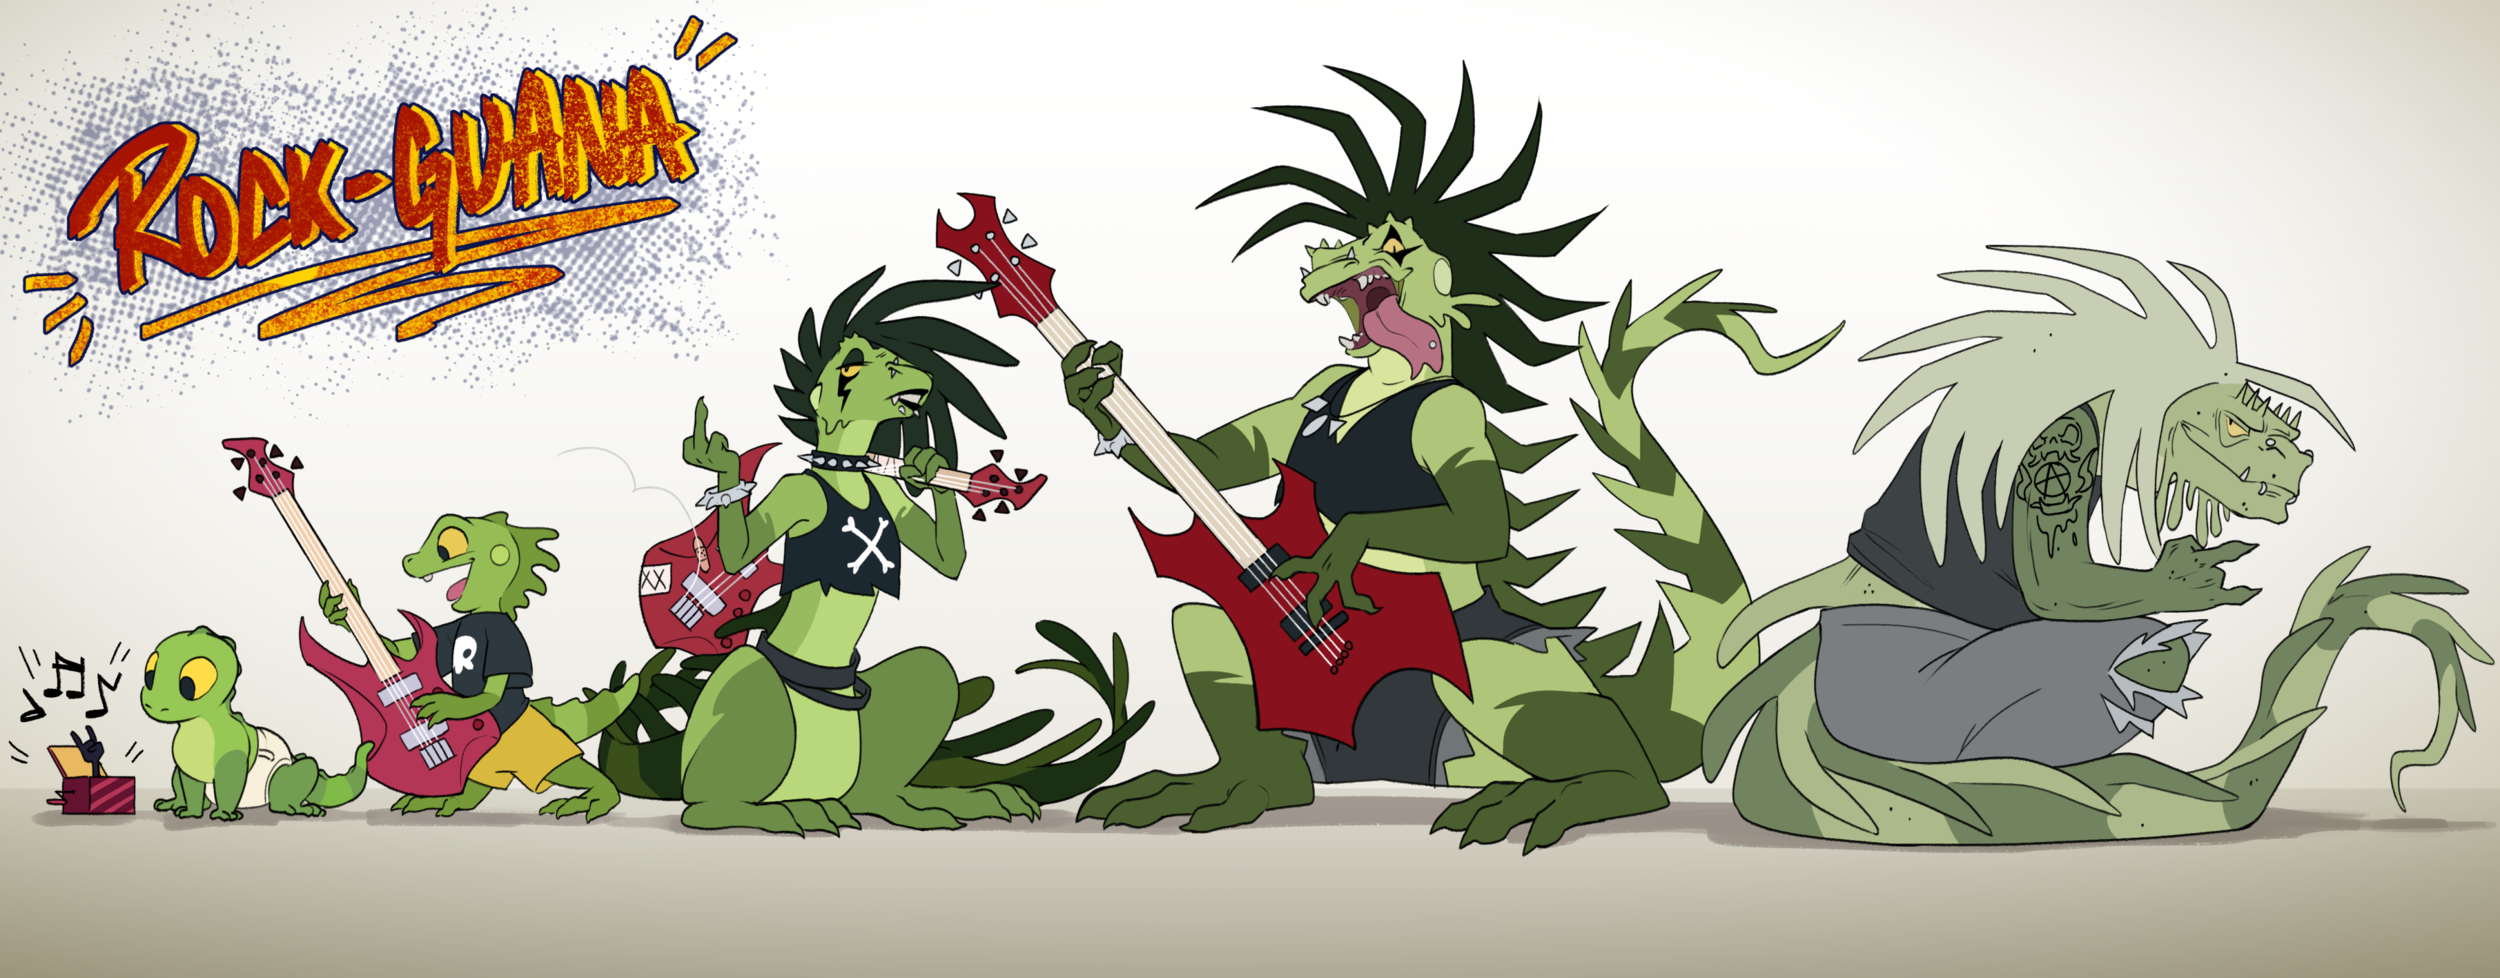 Show By Rock Moa  Character art, Character design, Character design  inspiration